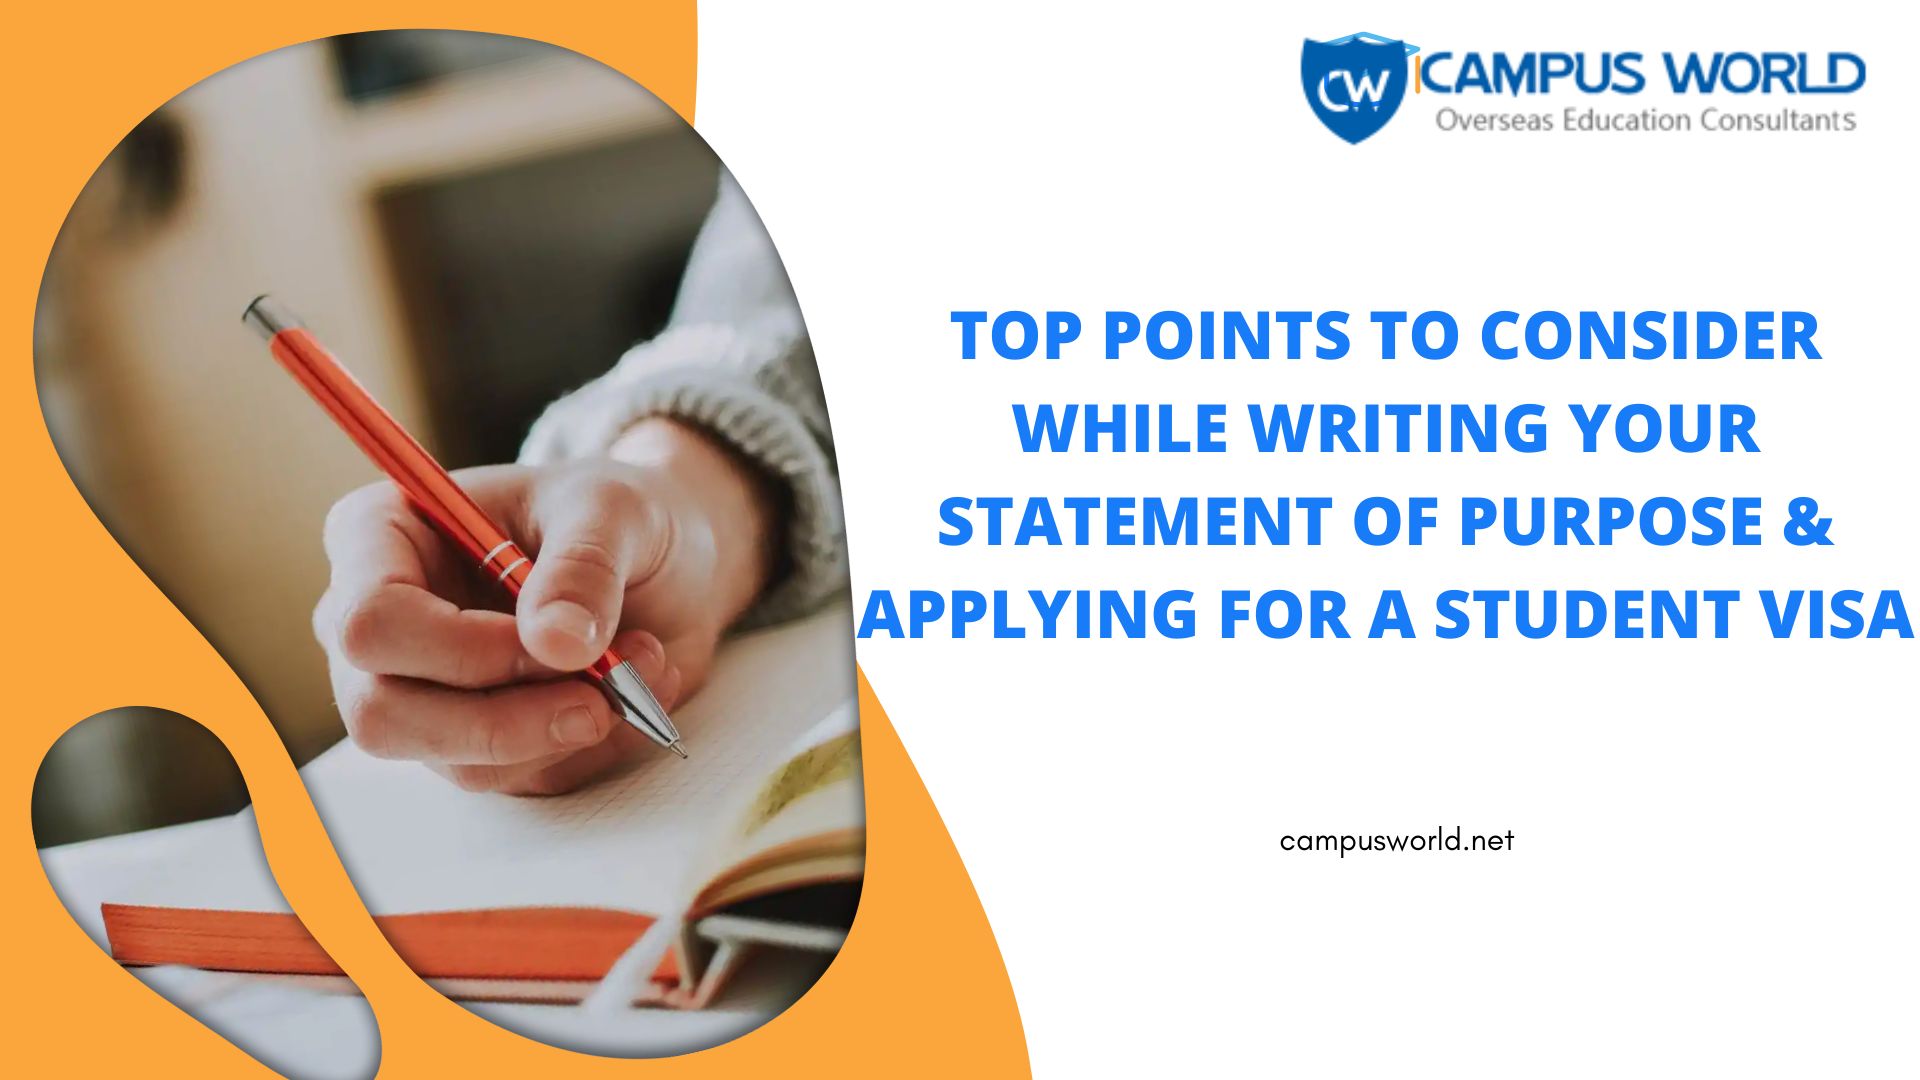 Top Points to Consider while Writing Your Statement of Purpose & Applying for a Student Visa